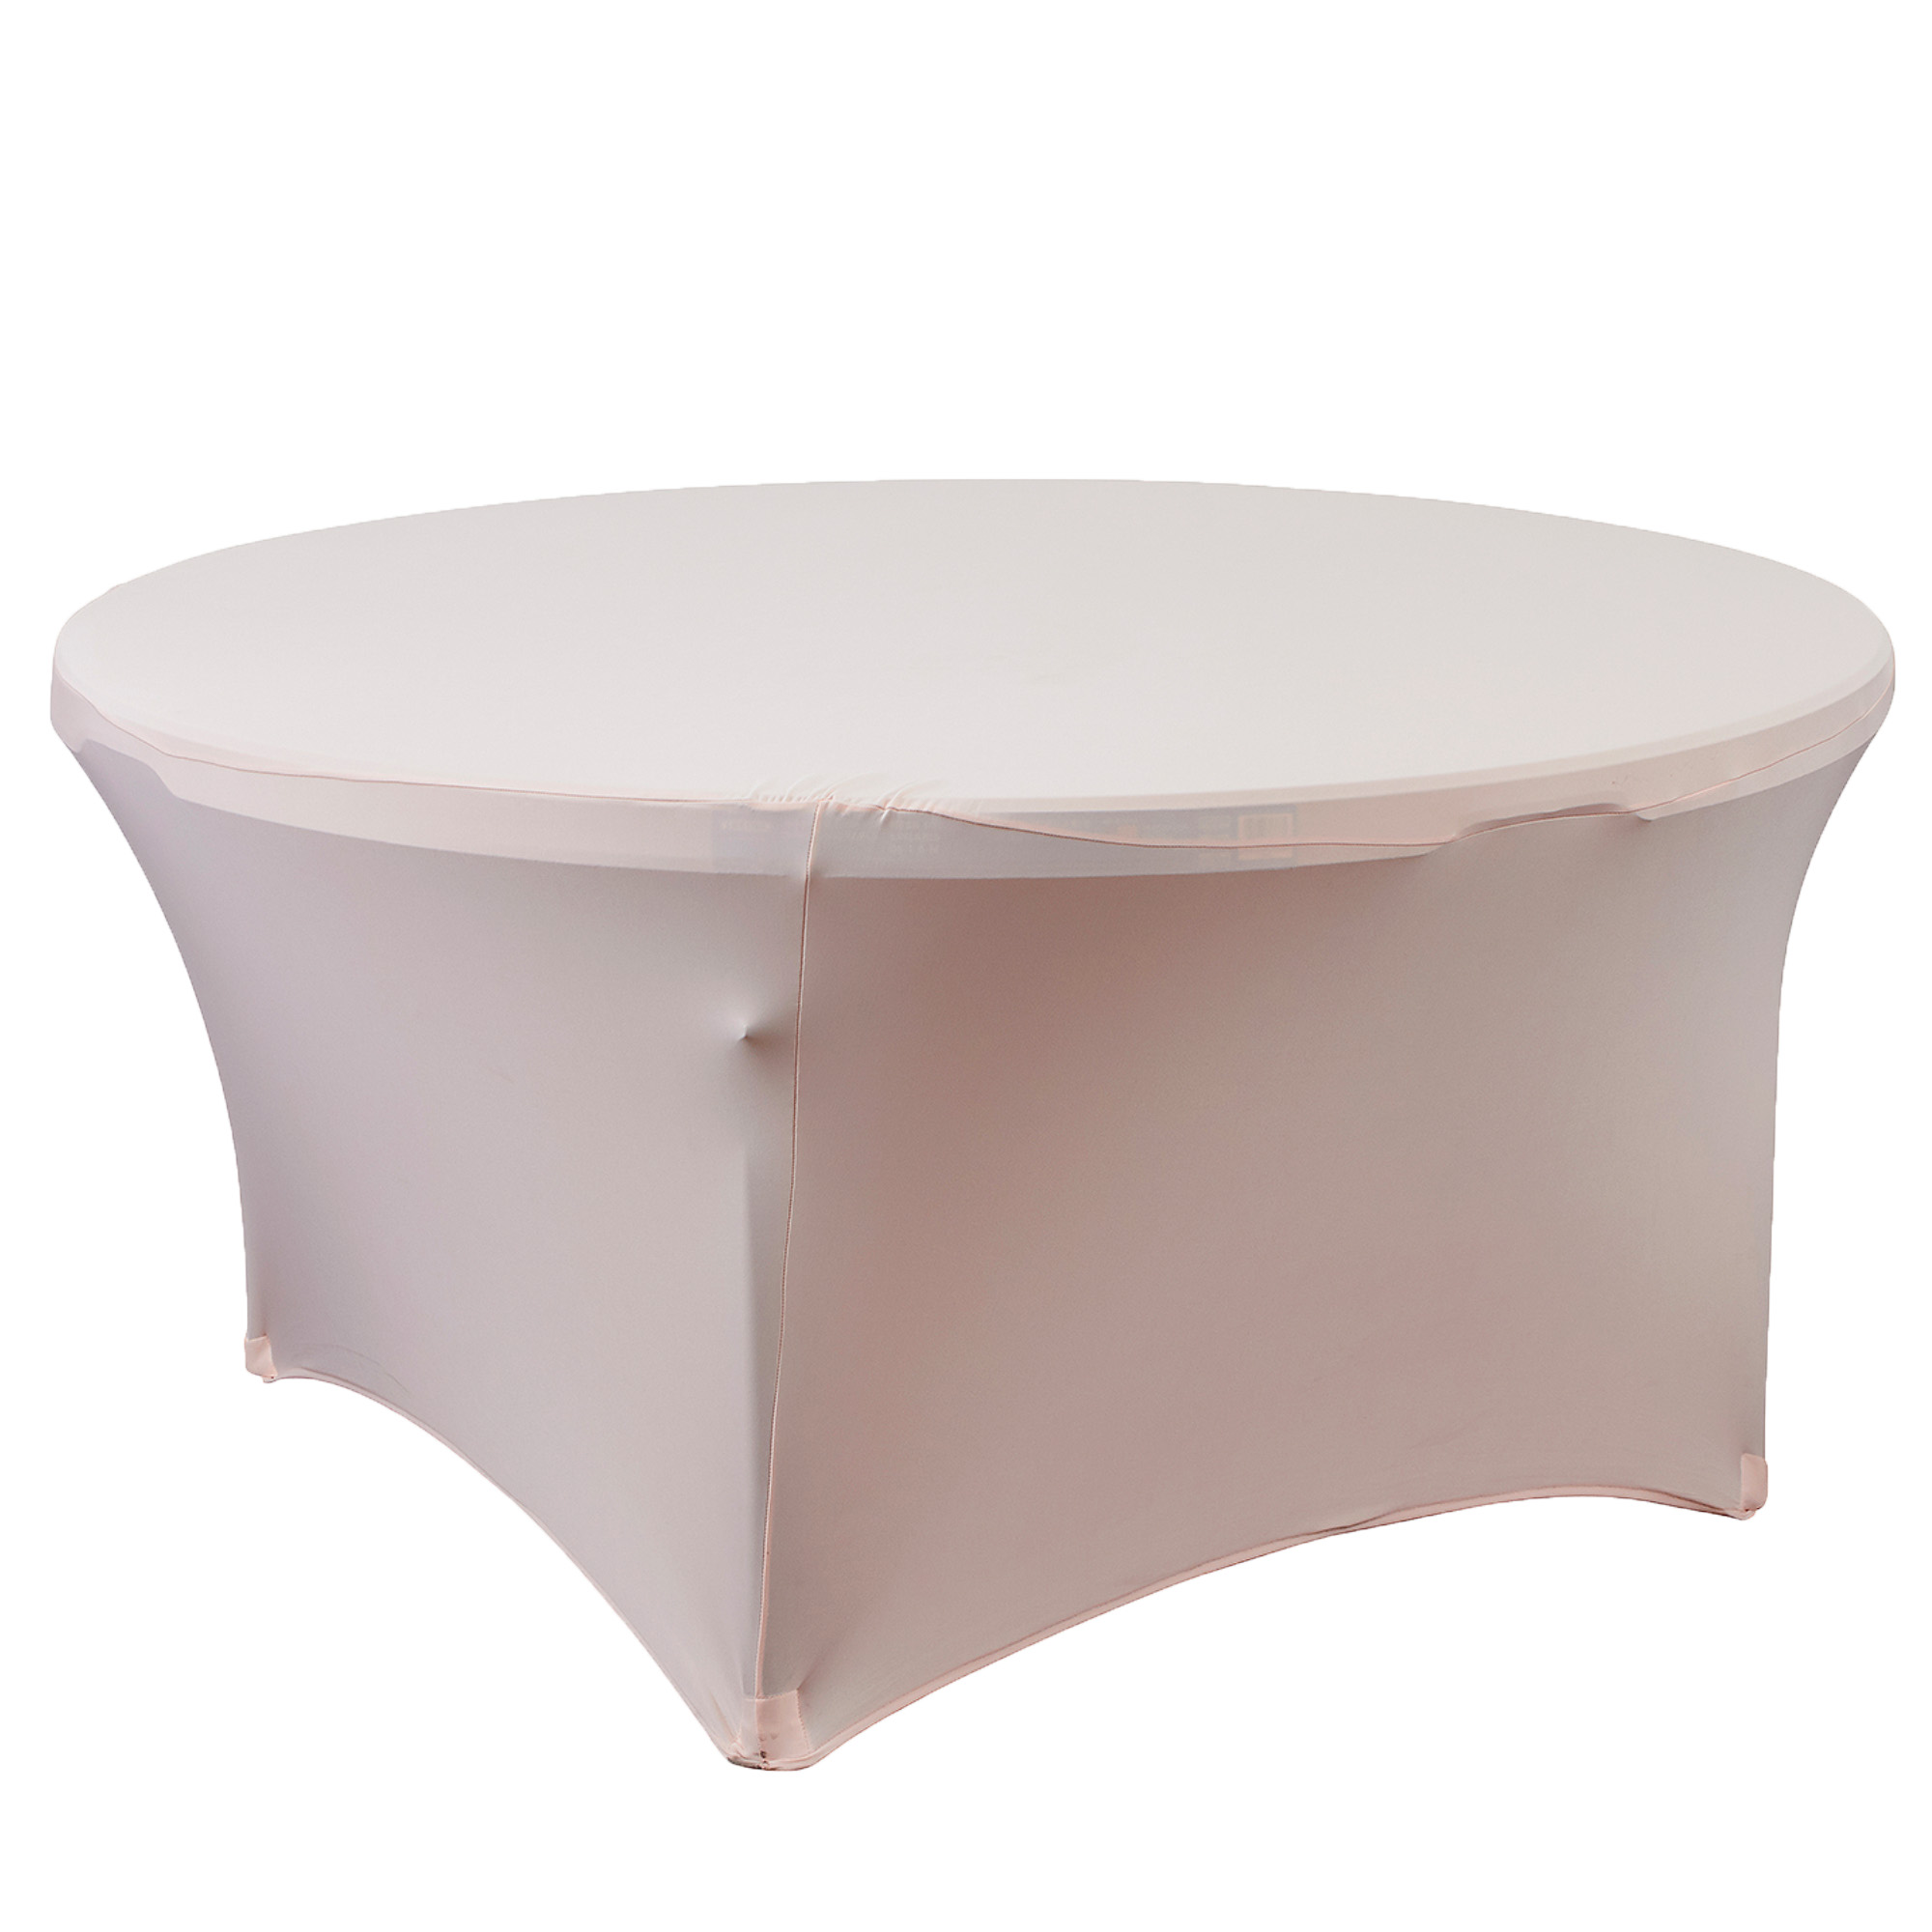 Spandex Round Table Cover 72" - Blush